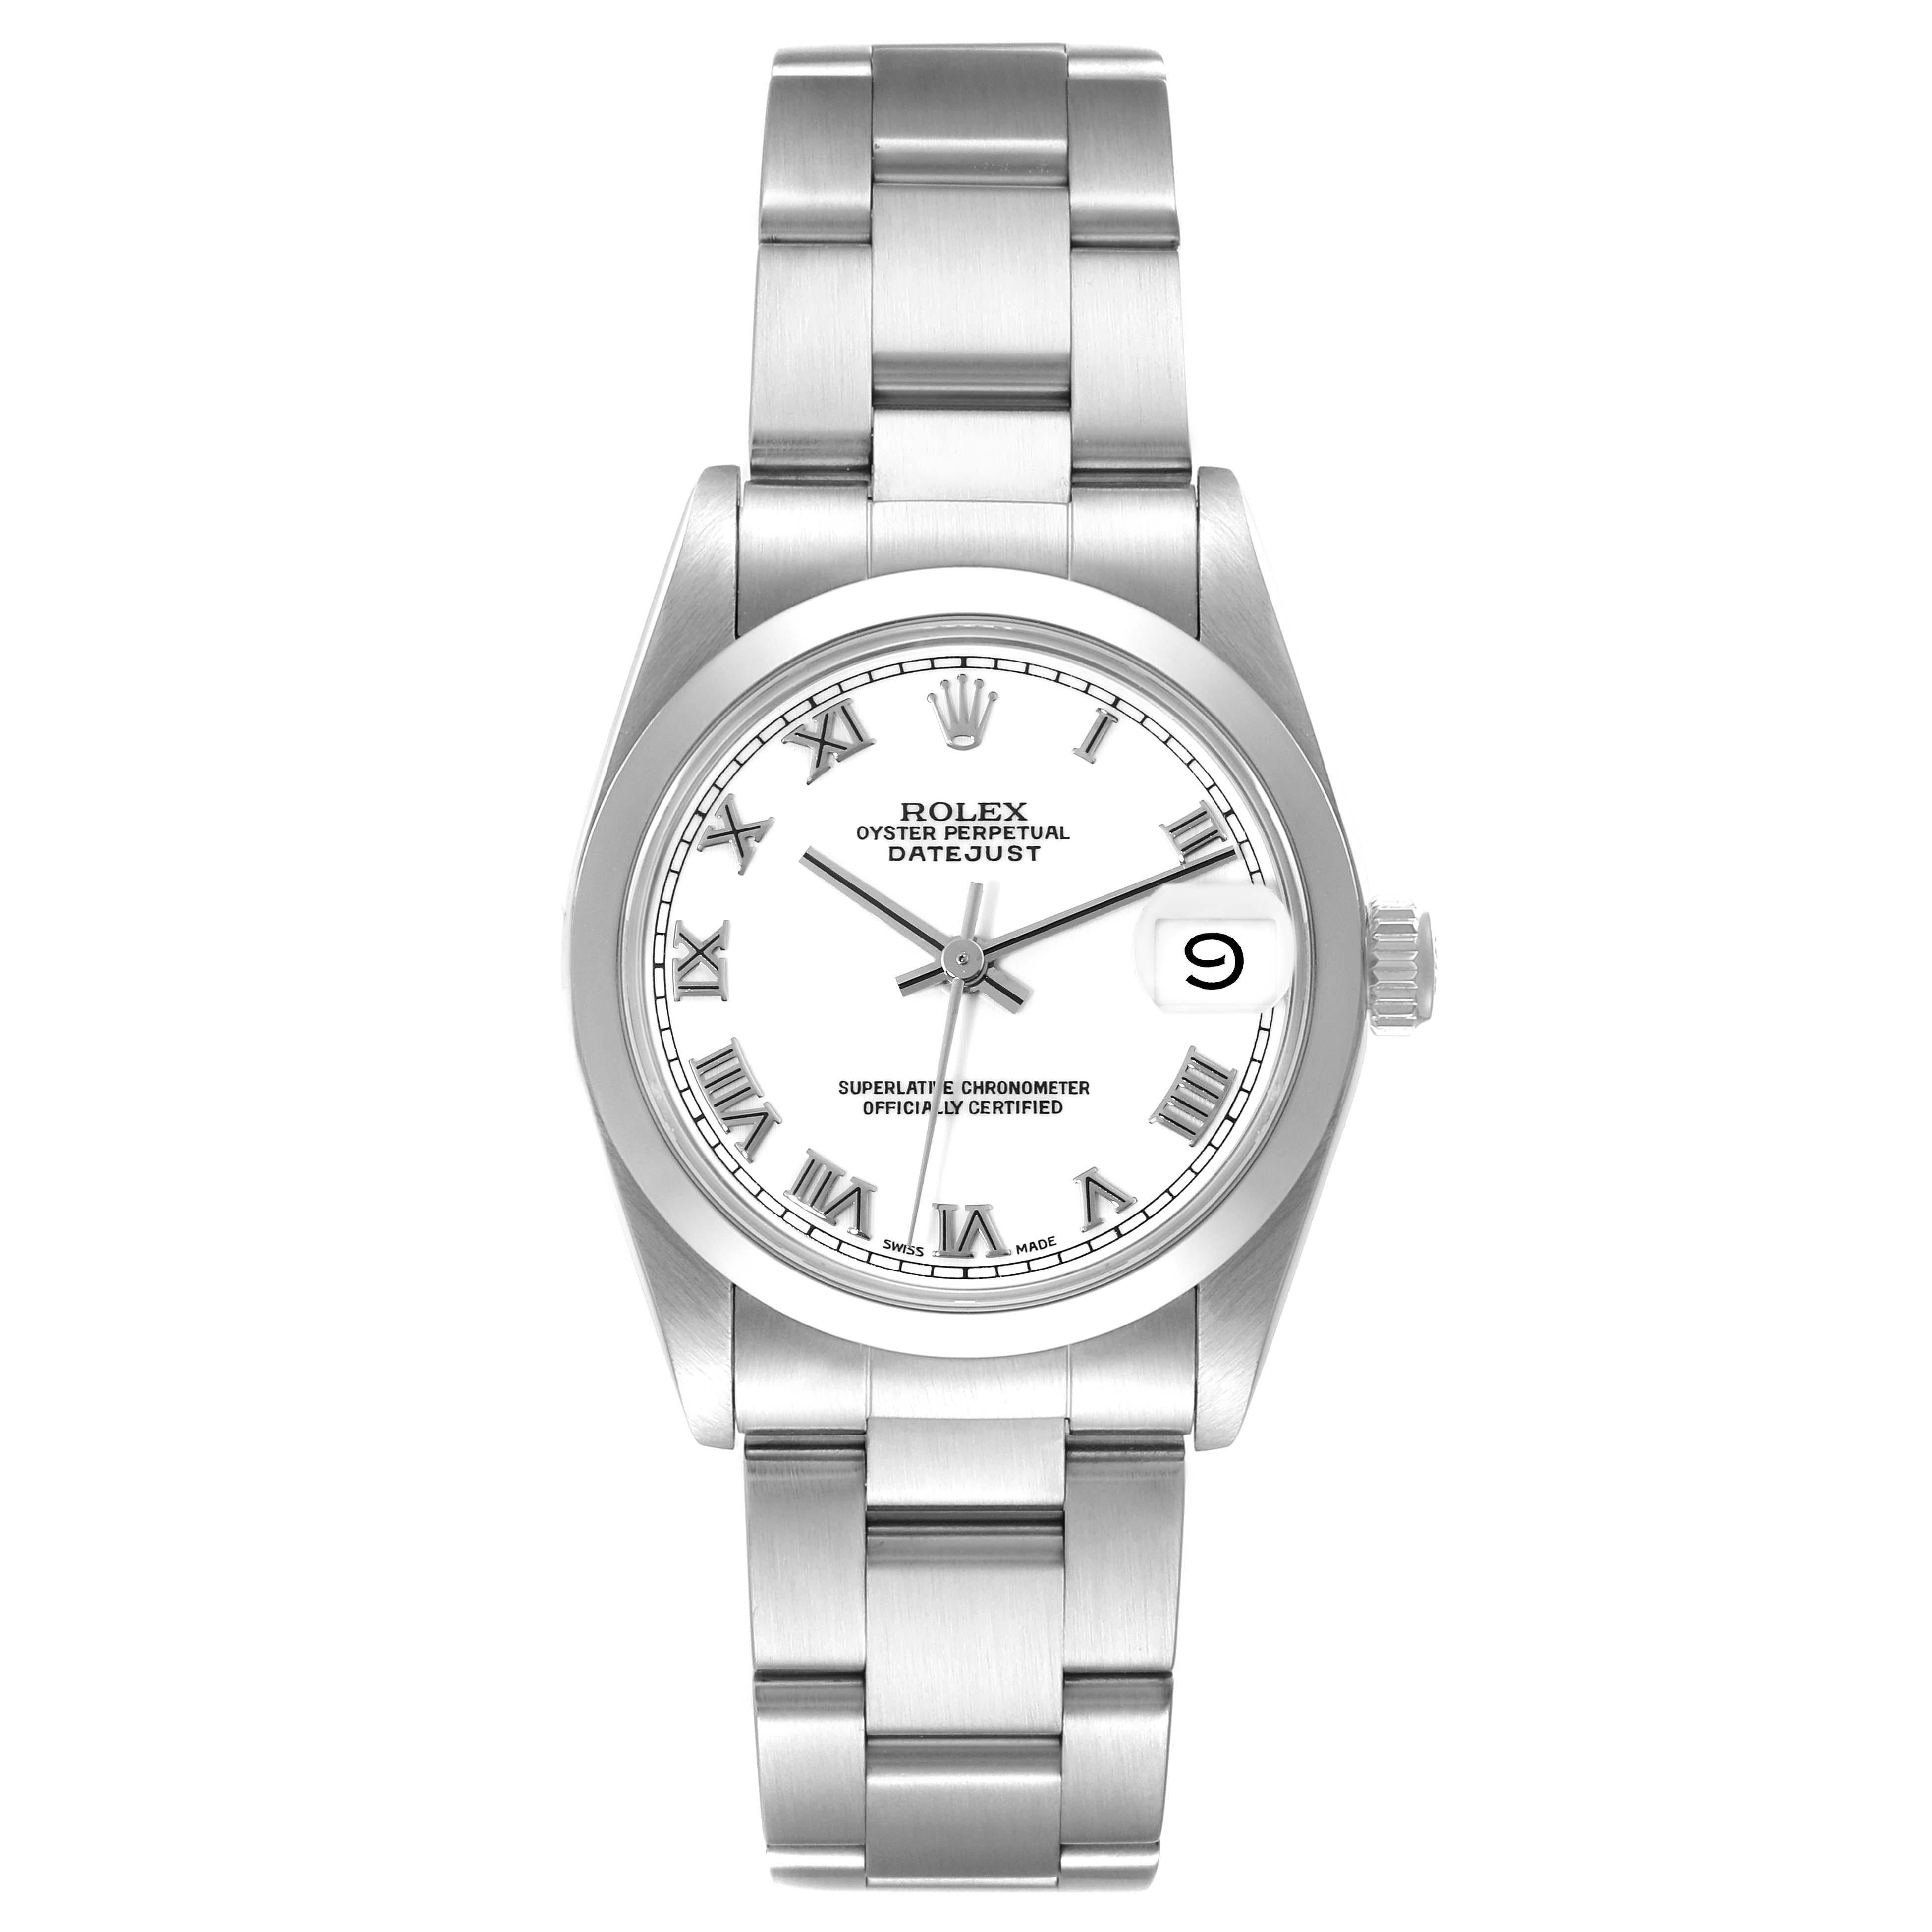 Rolex Datejust Midsize White Dial Steel Ladies Watch 68240 Box Papers. Officially certified chronometer automatic self-winding movement. Stainless steel oyster case 31 mm in diameter. Rolex logo on the crown. Stainless steel smooth bezel. Scratch